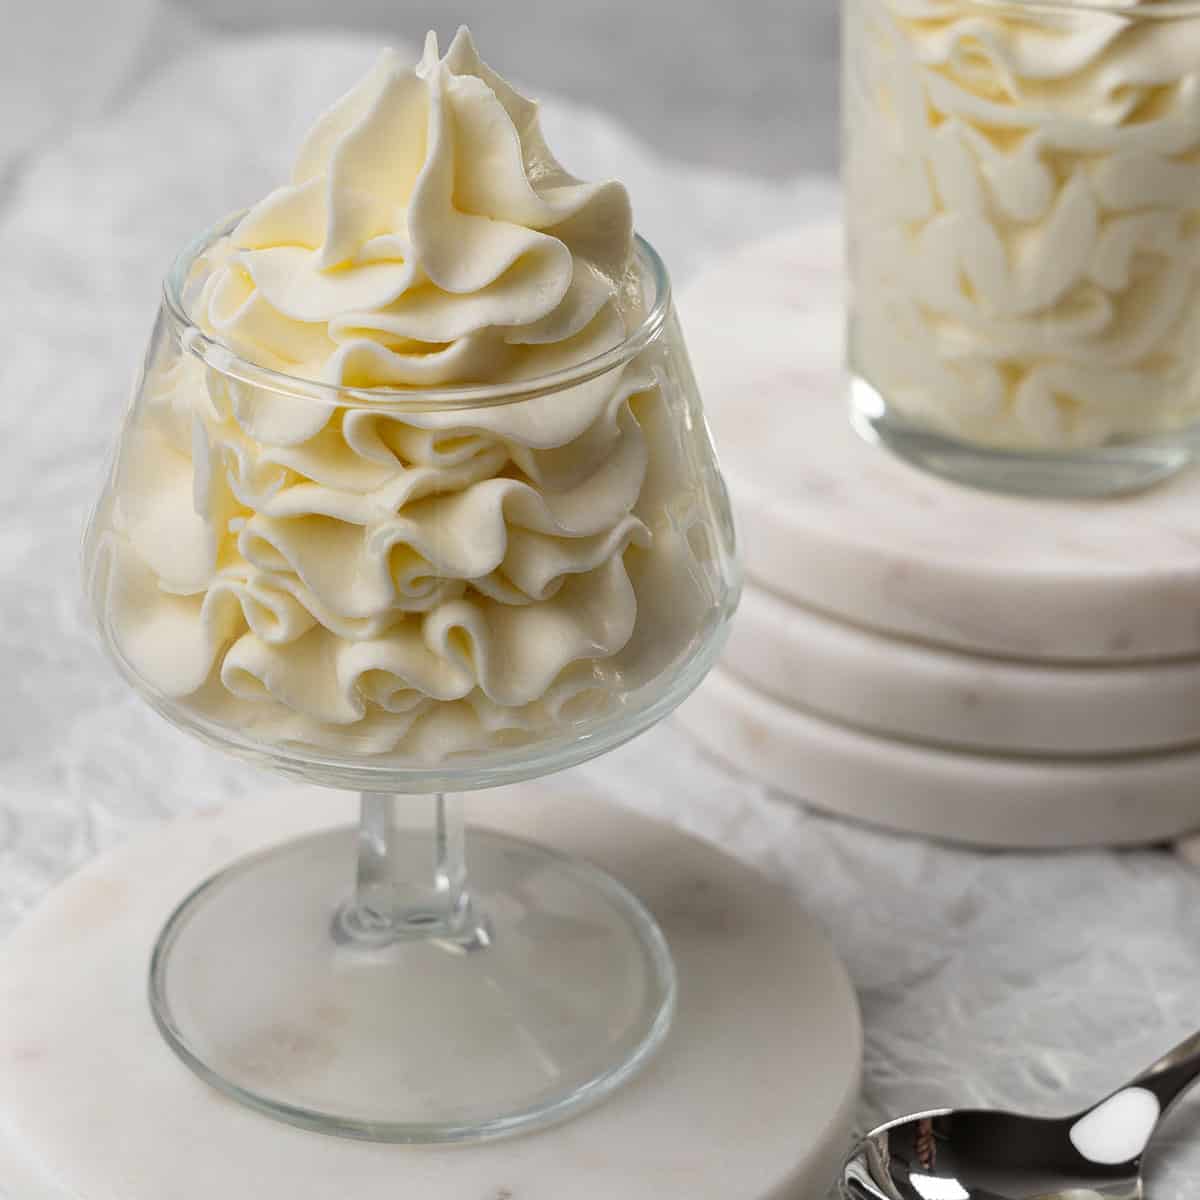 Cream cheese frosting in a glass.